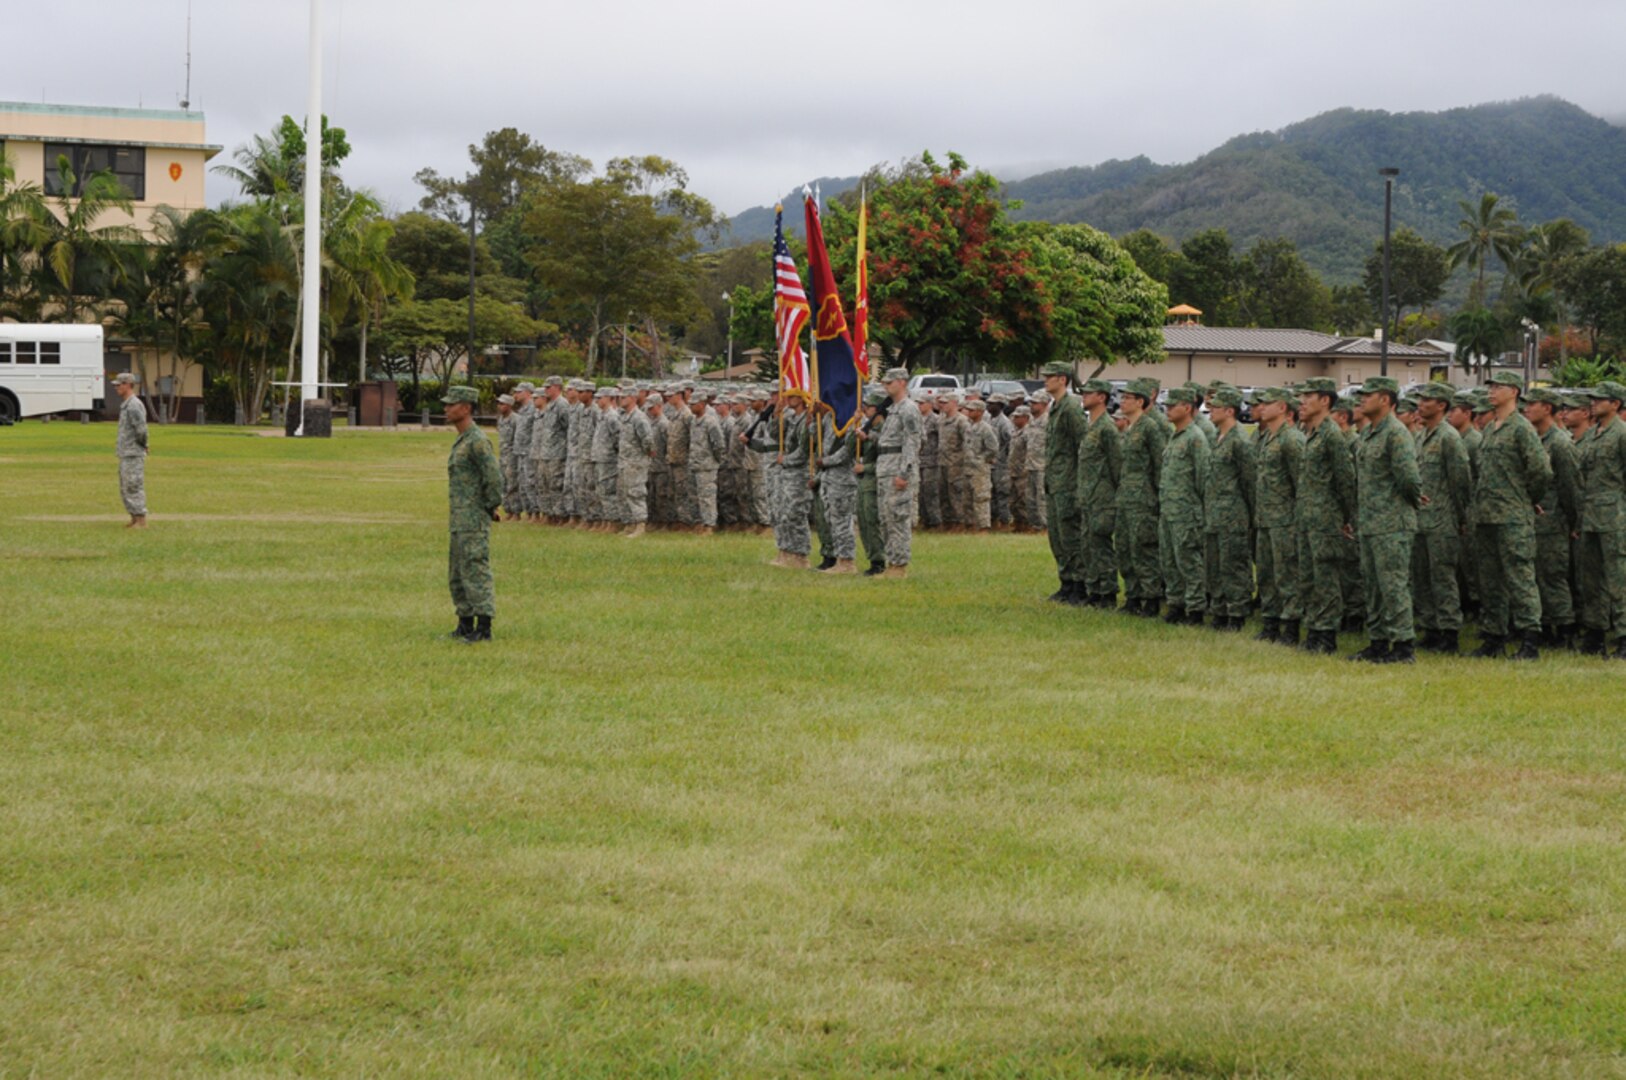 SCHOFIELD BARRACKS, Hawaii (July 14, 2014) - Soldiers from 2nd Battalion, 35th Infantry Regiment "Cacti," 3rd Brigade Combat Team, 25th Infantry Division, and a Singaporian rifle company, stand in formation during the opening ceremony, at Weyand Field, marking the official start of Tiger Balm 2014.  